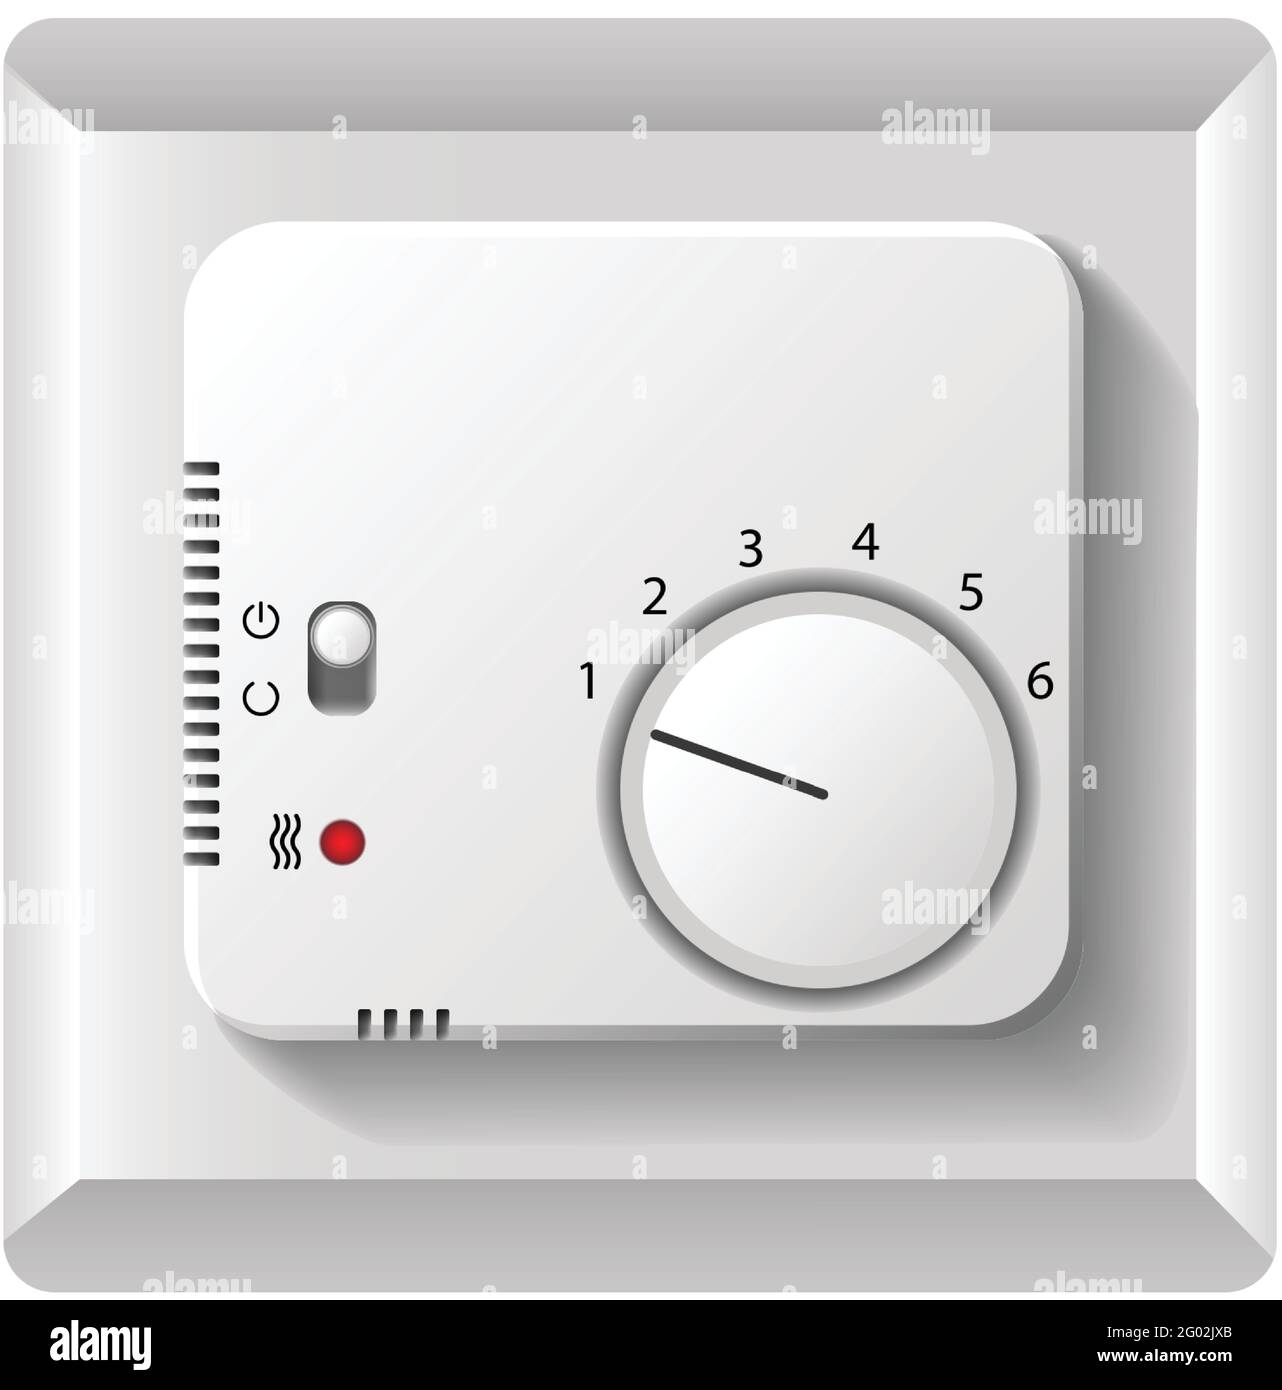 realistic vector panel of temperature regulator switch. Heat and air con control panel. Isolated icon illustration. Stock Vector